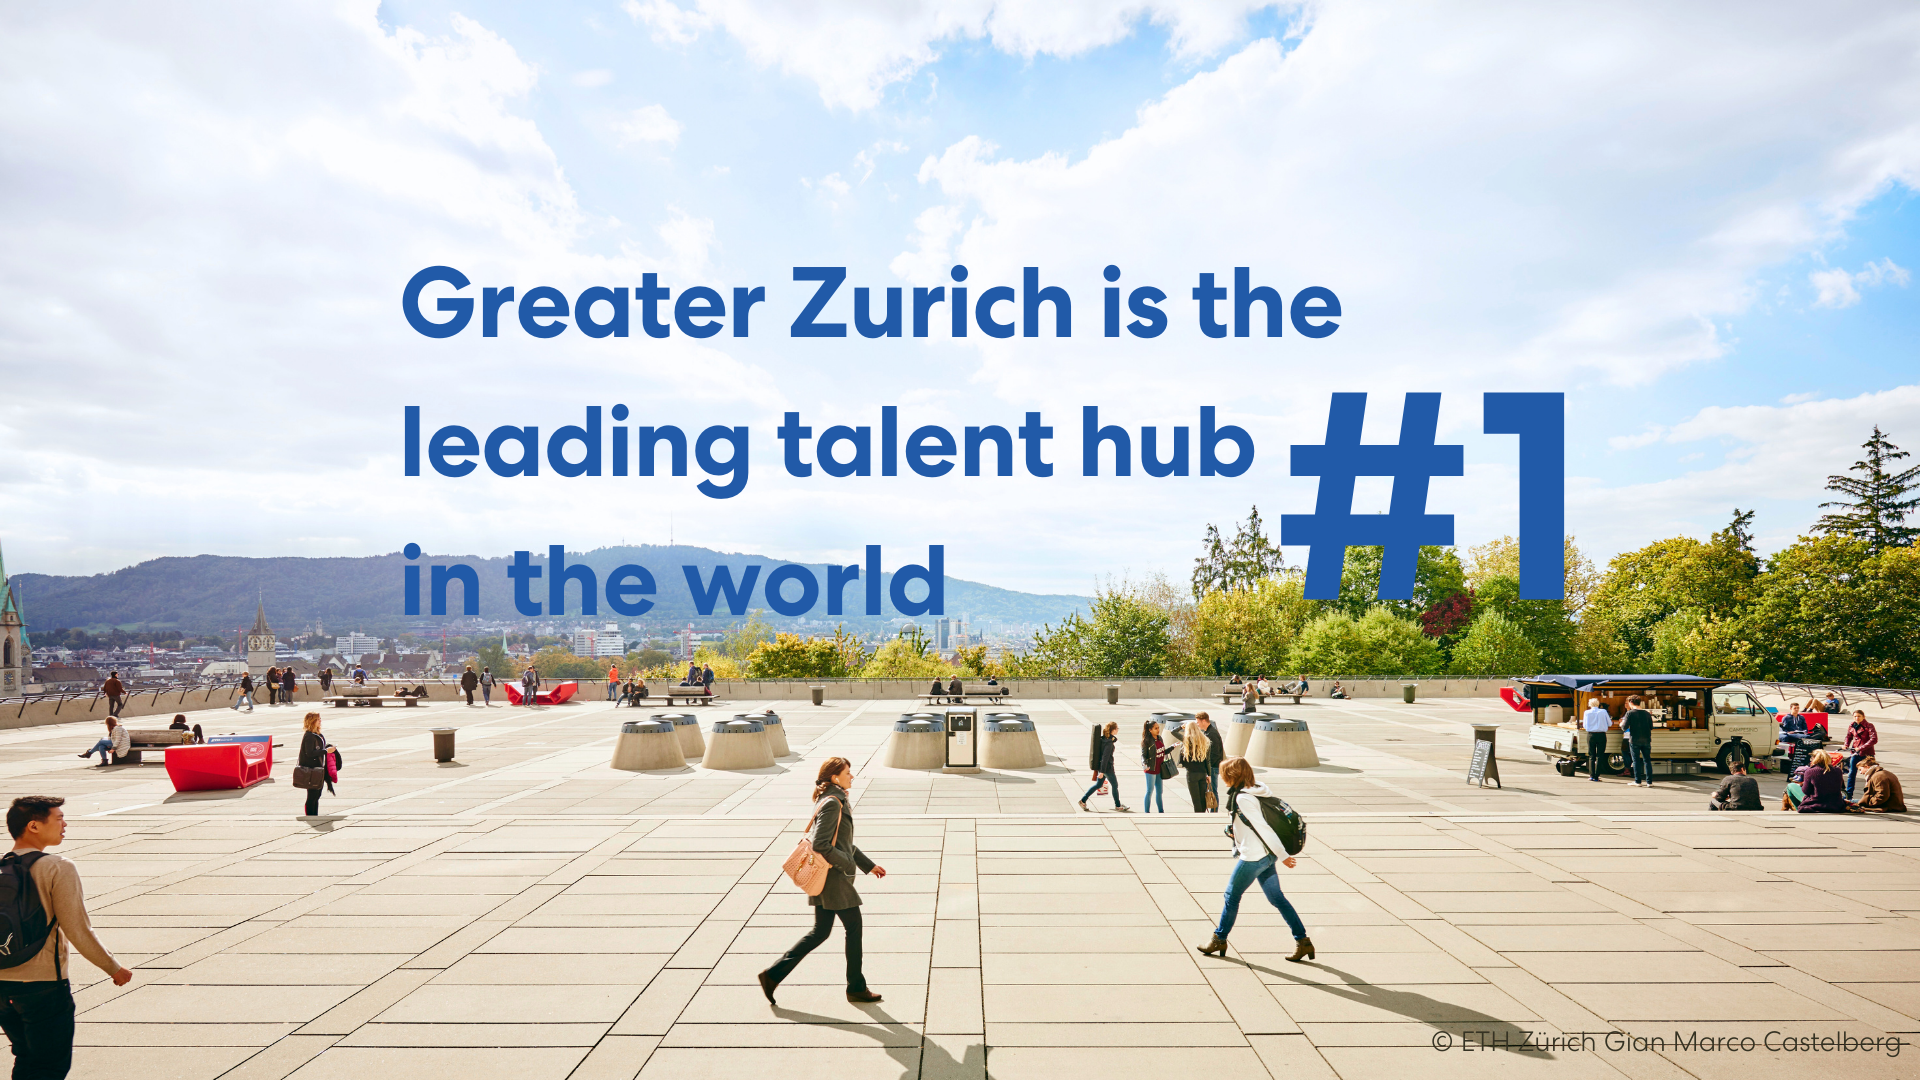 Top talent finds a home in Greater Zurich